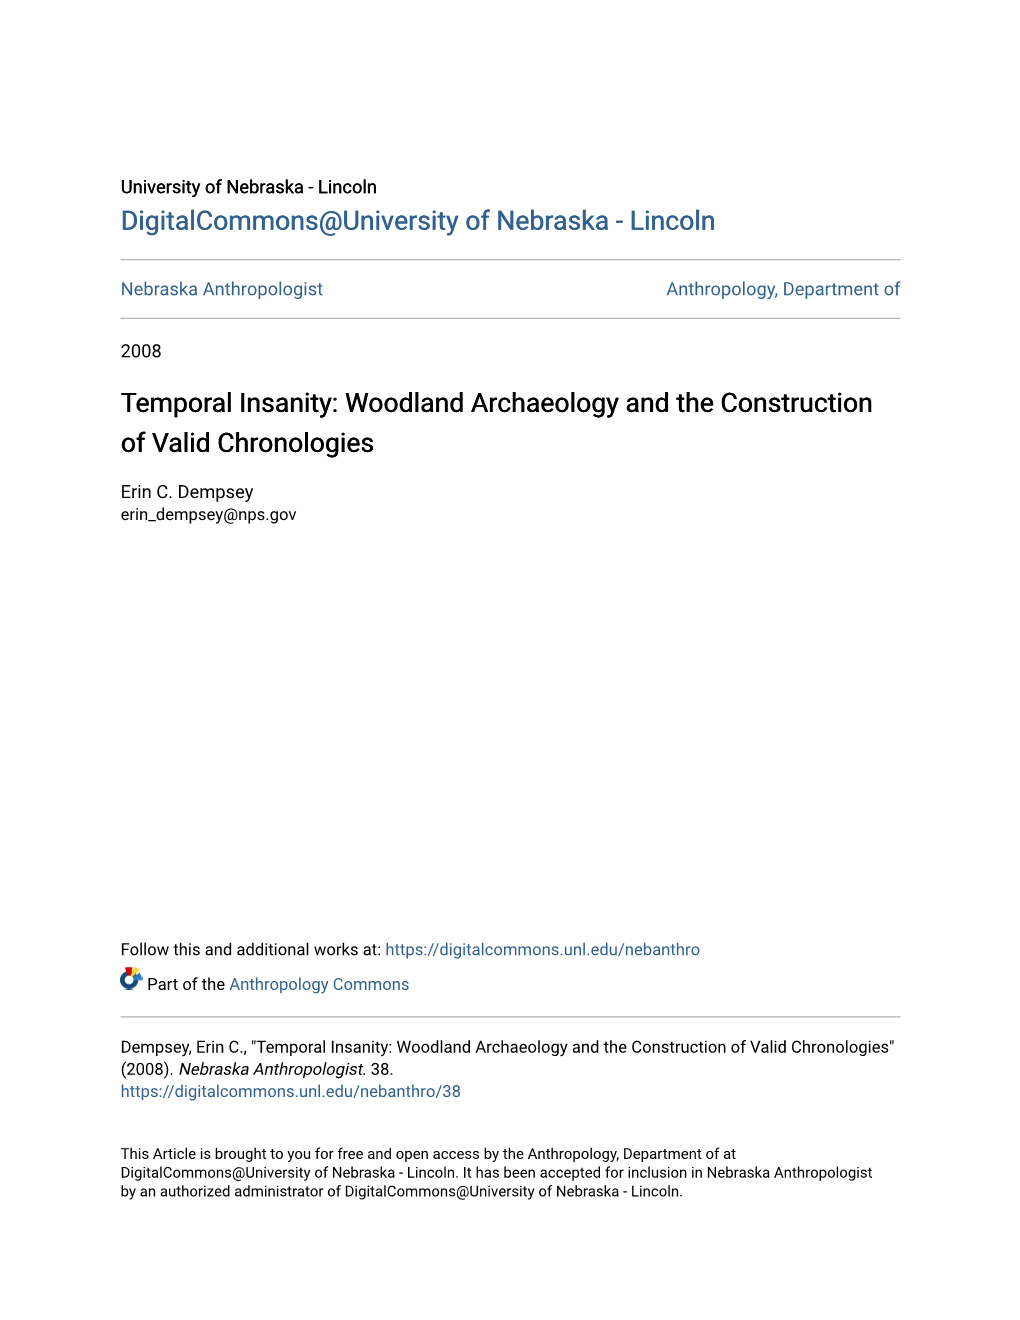 Woodland Archaeology and the Construction of Valid Chronologies